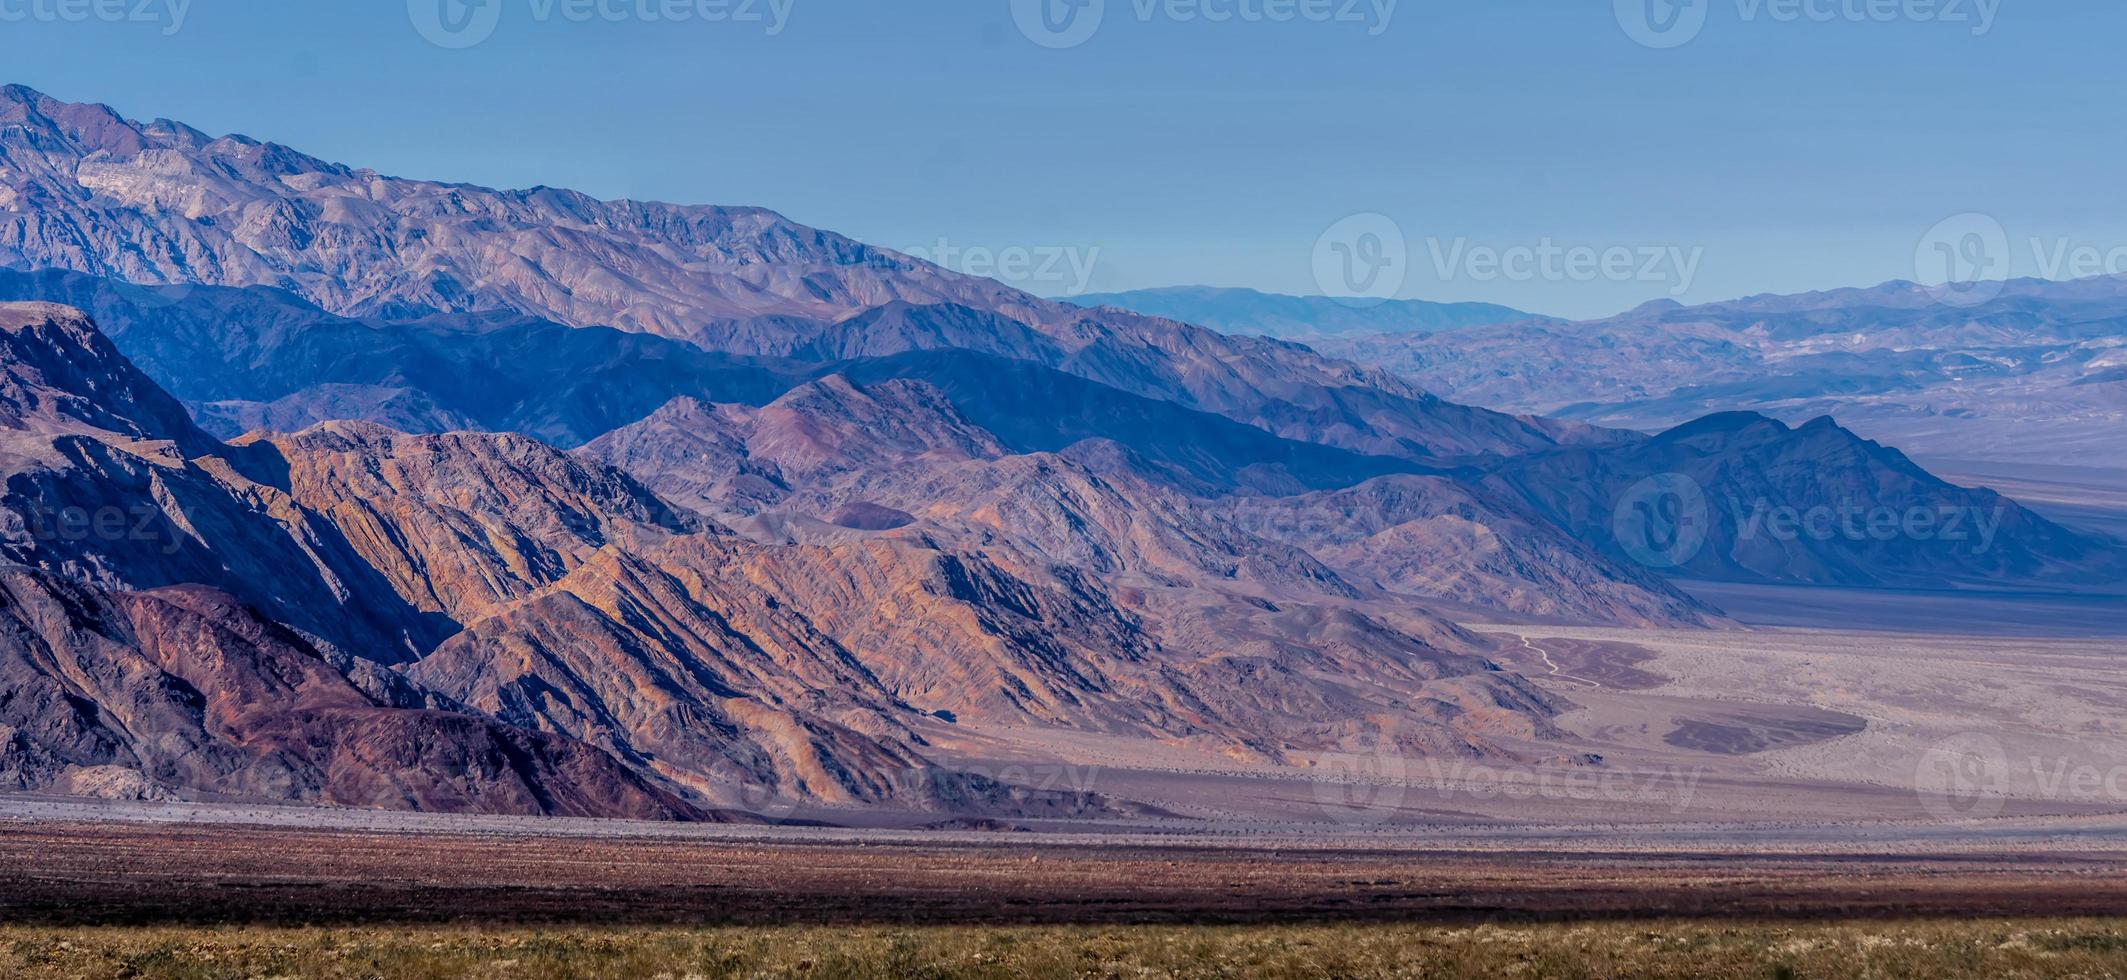 death valley national park scenery photo